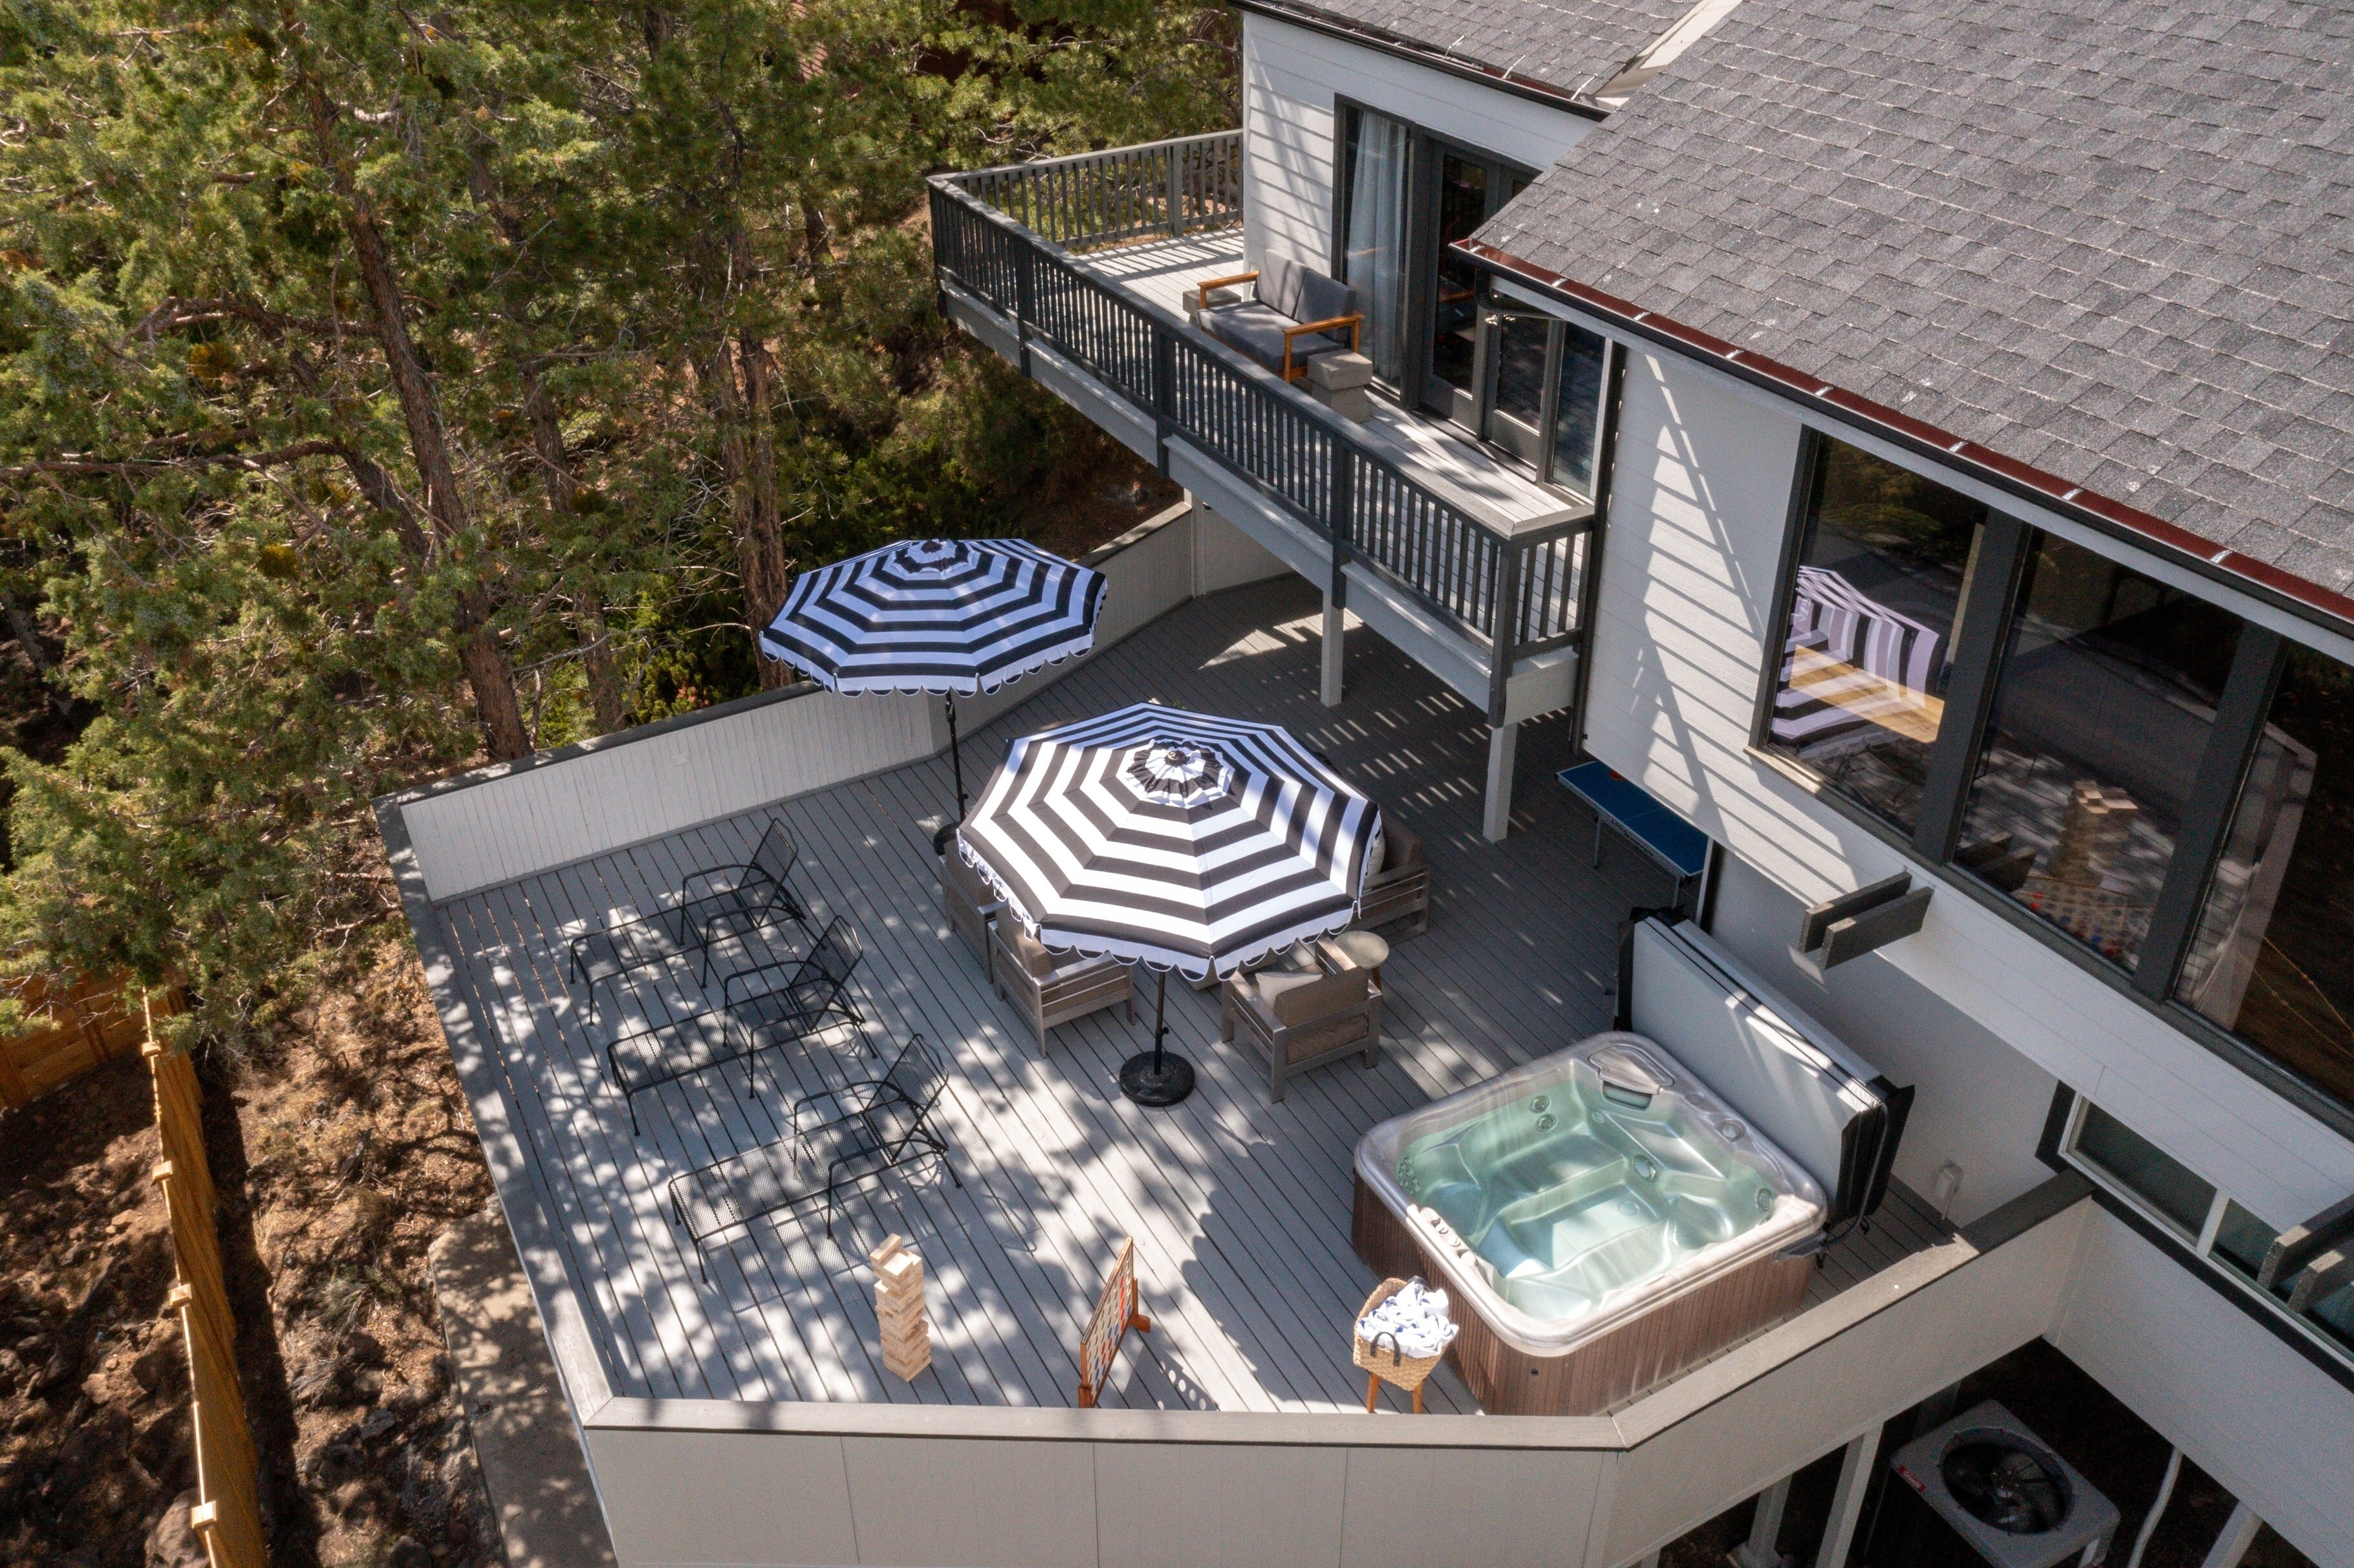 Multiple spacious decks with hot tub, fire pit, dining, ping pong, and all around lounging.